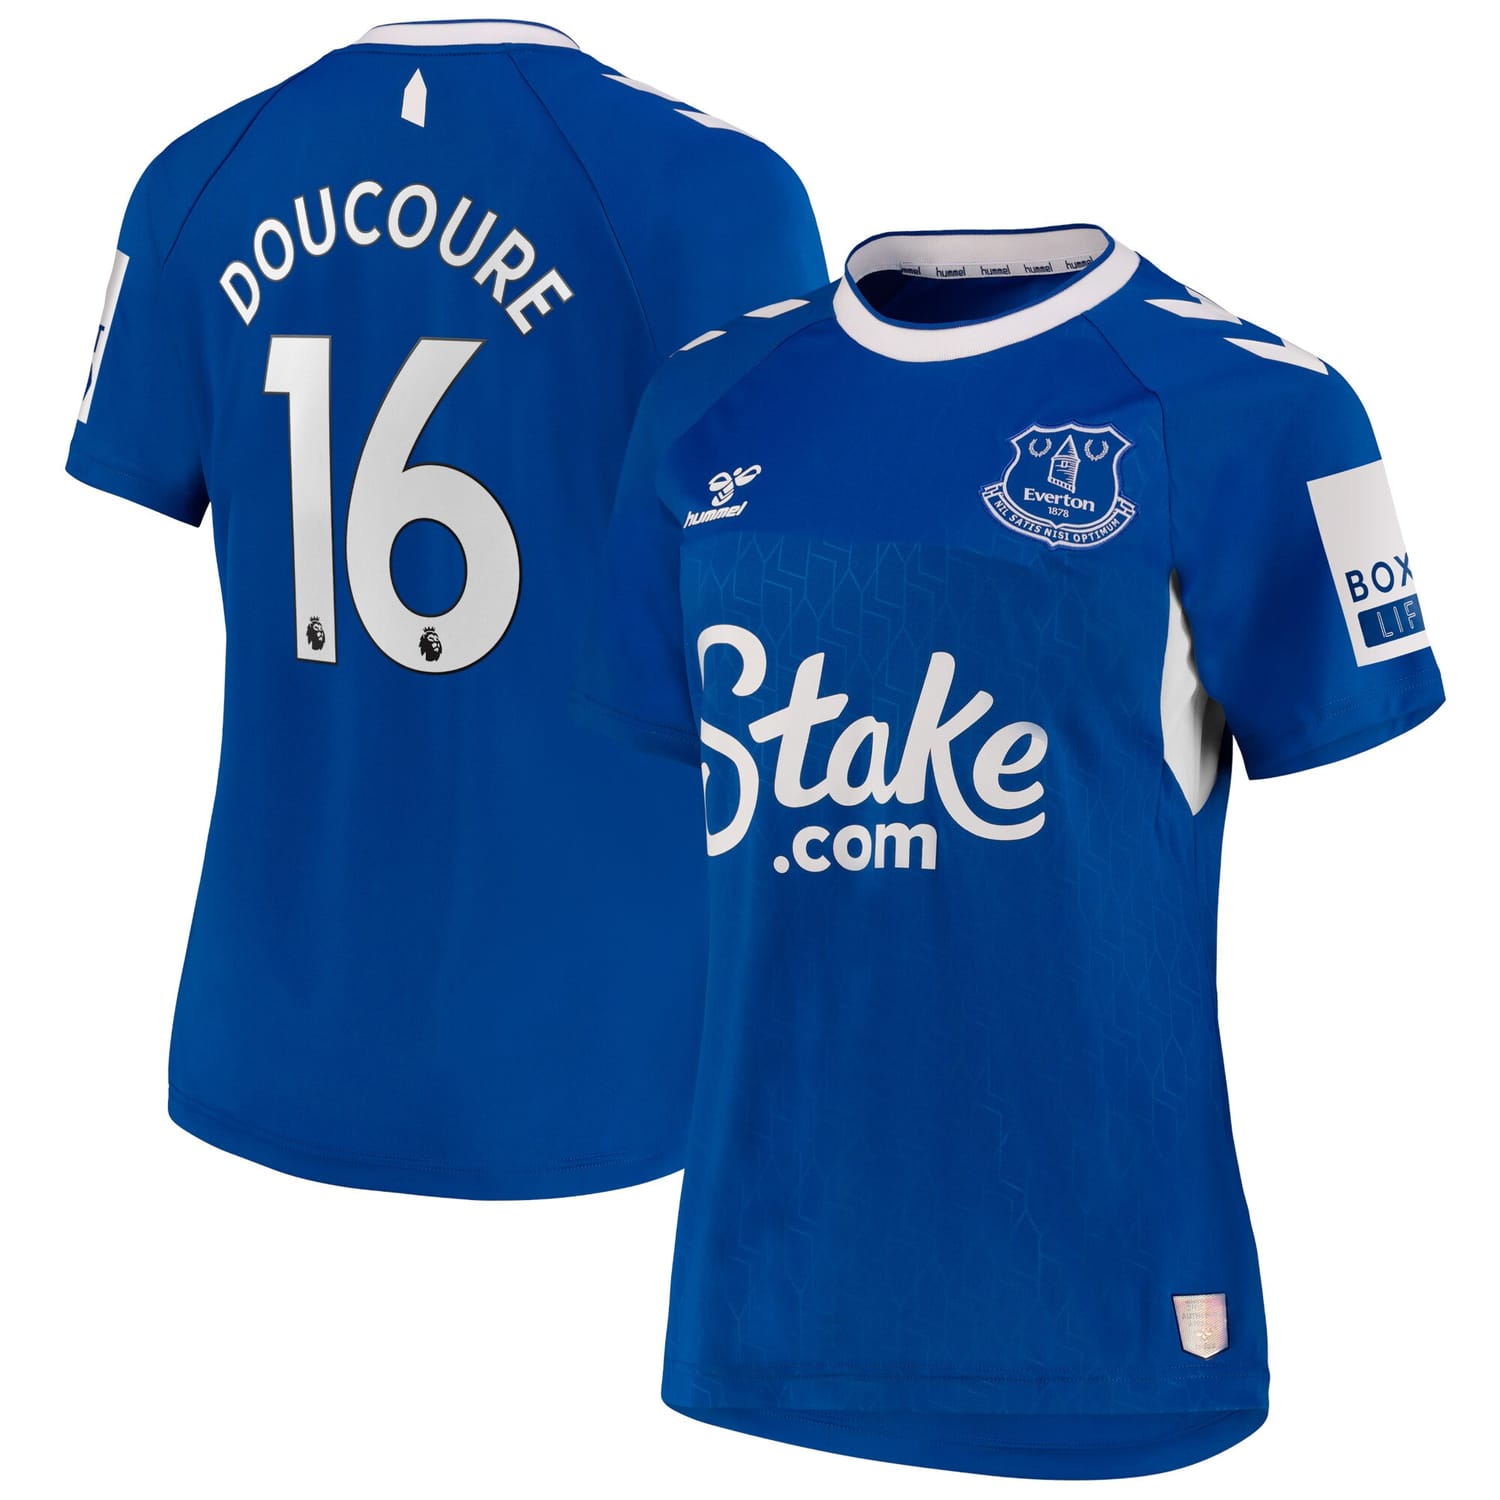 Premier League Everton Home Jersey Shirt 2022-23 player Abdoulaye Doucouré 16 printing for Women